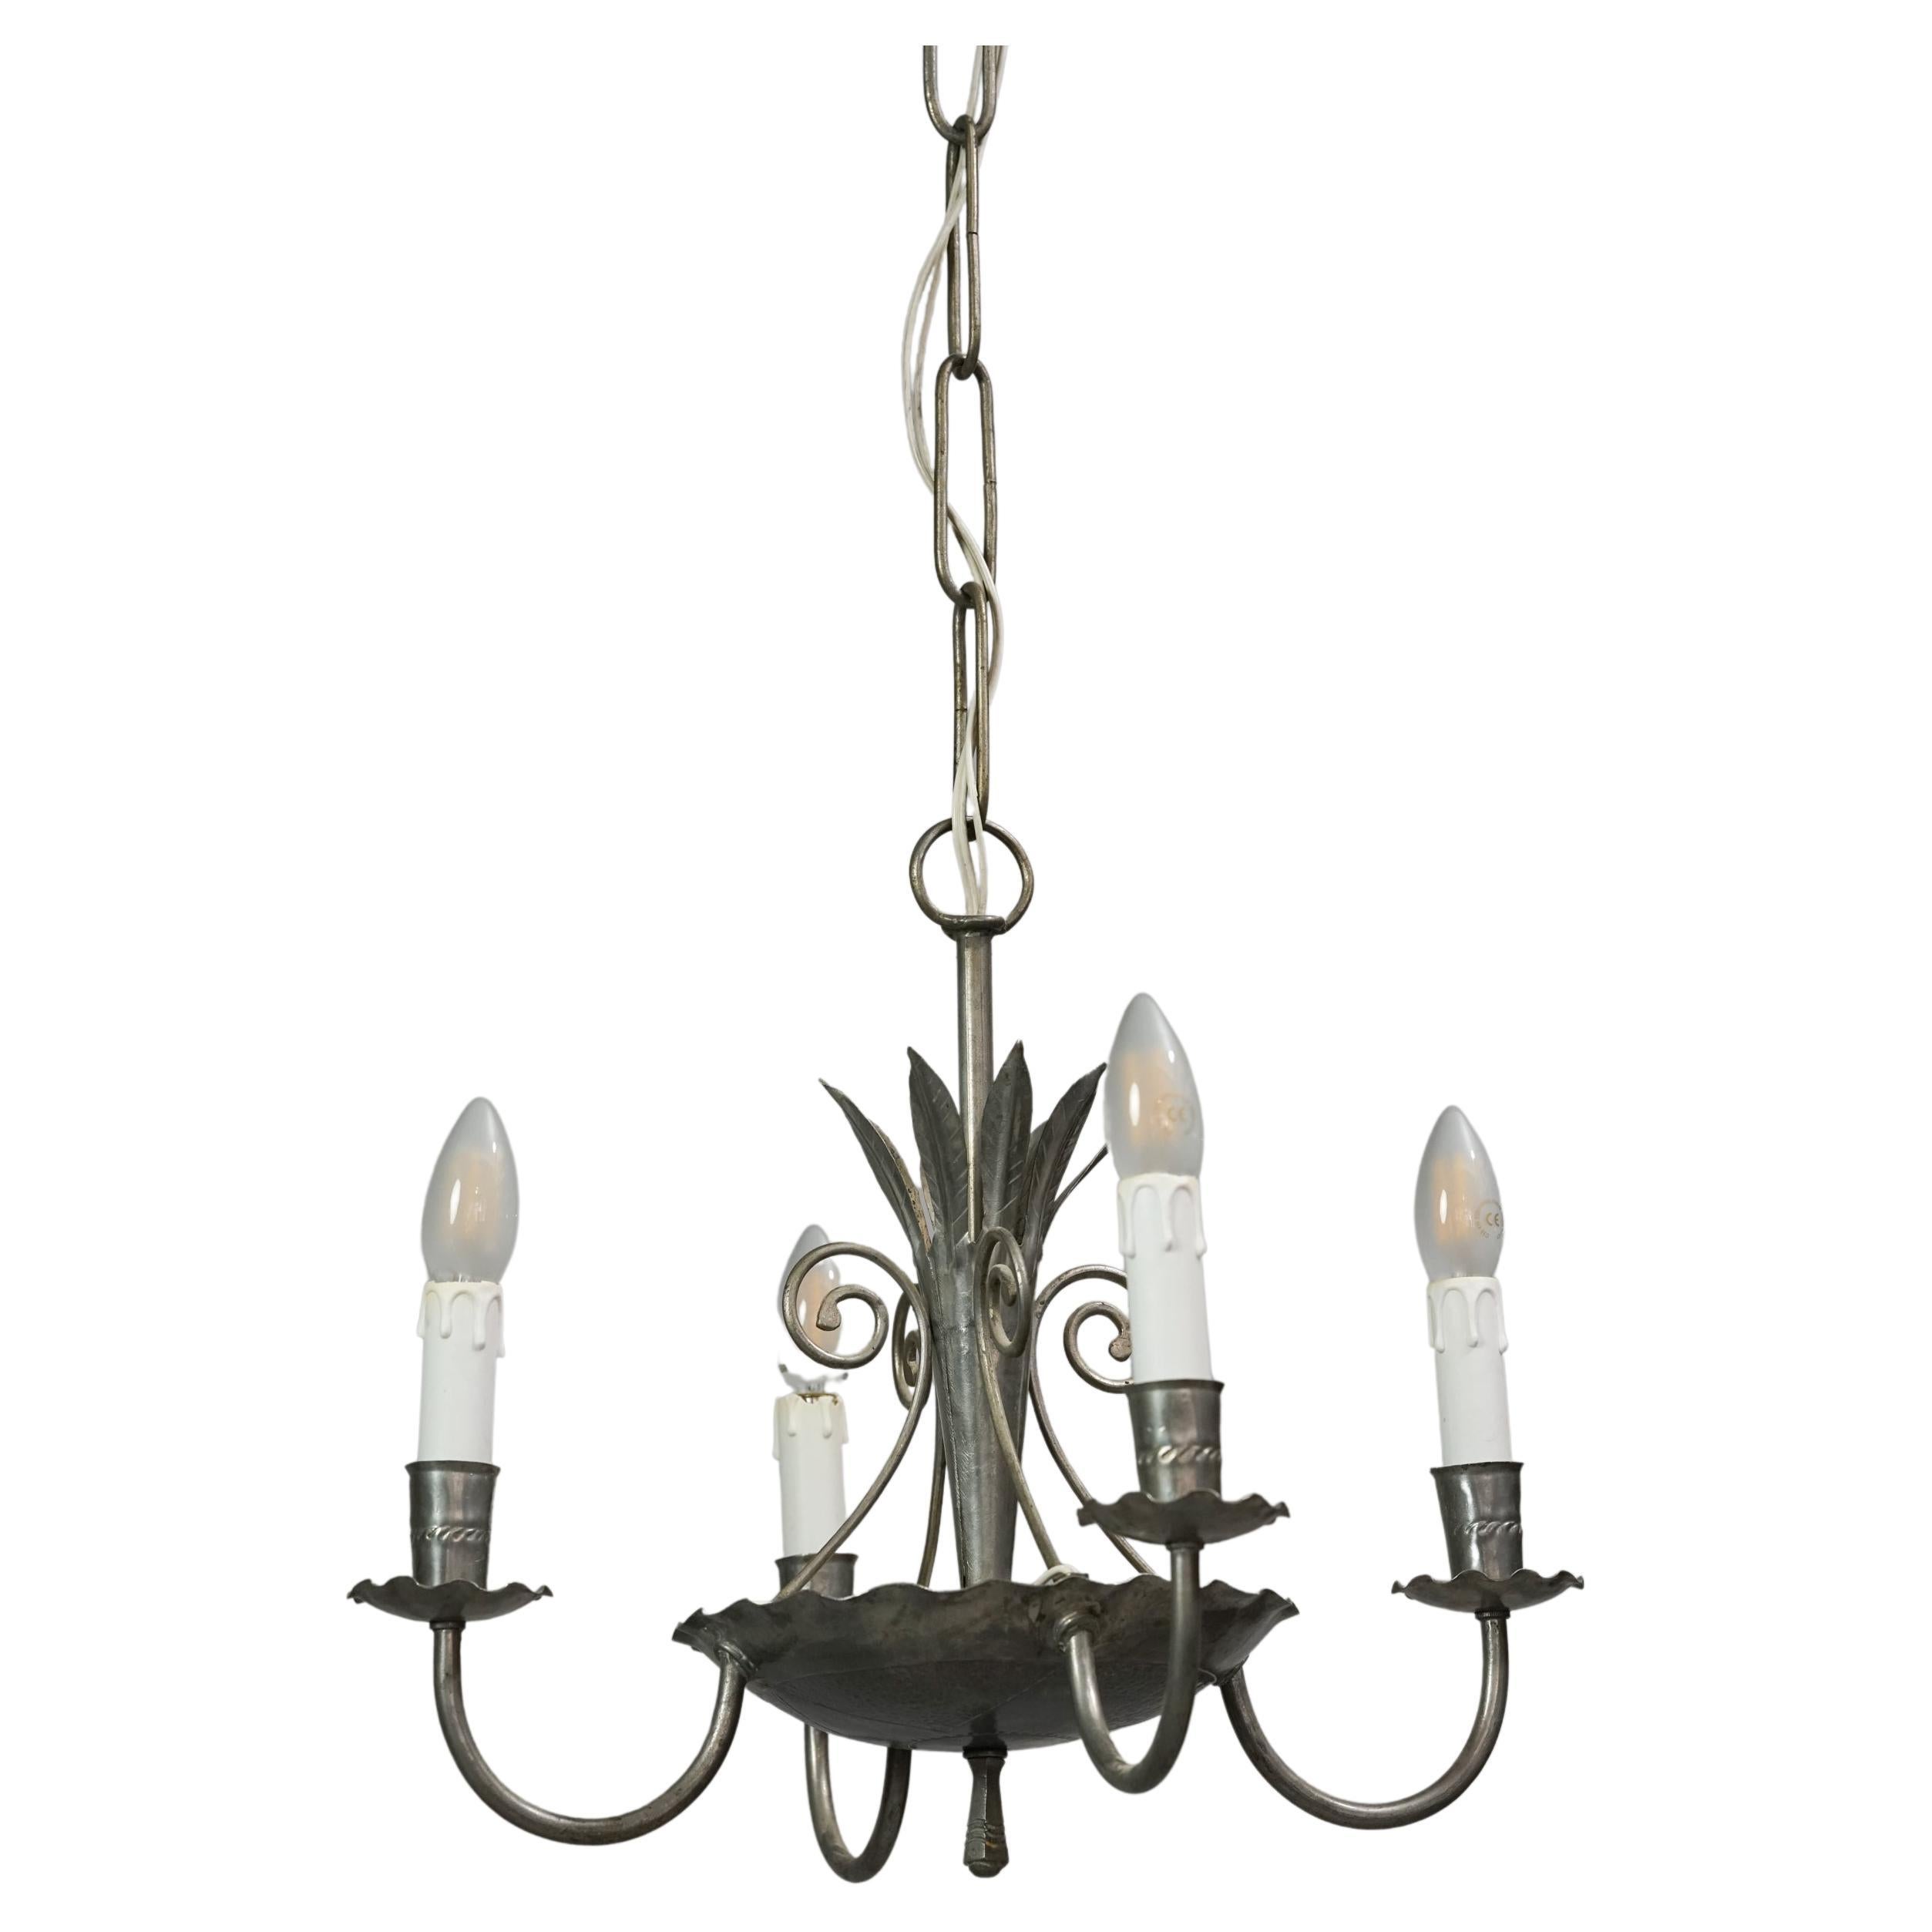 Rare Finnish Iron Chandelier Attributed to Paavo Tynell, 1920s